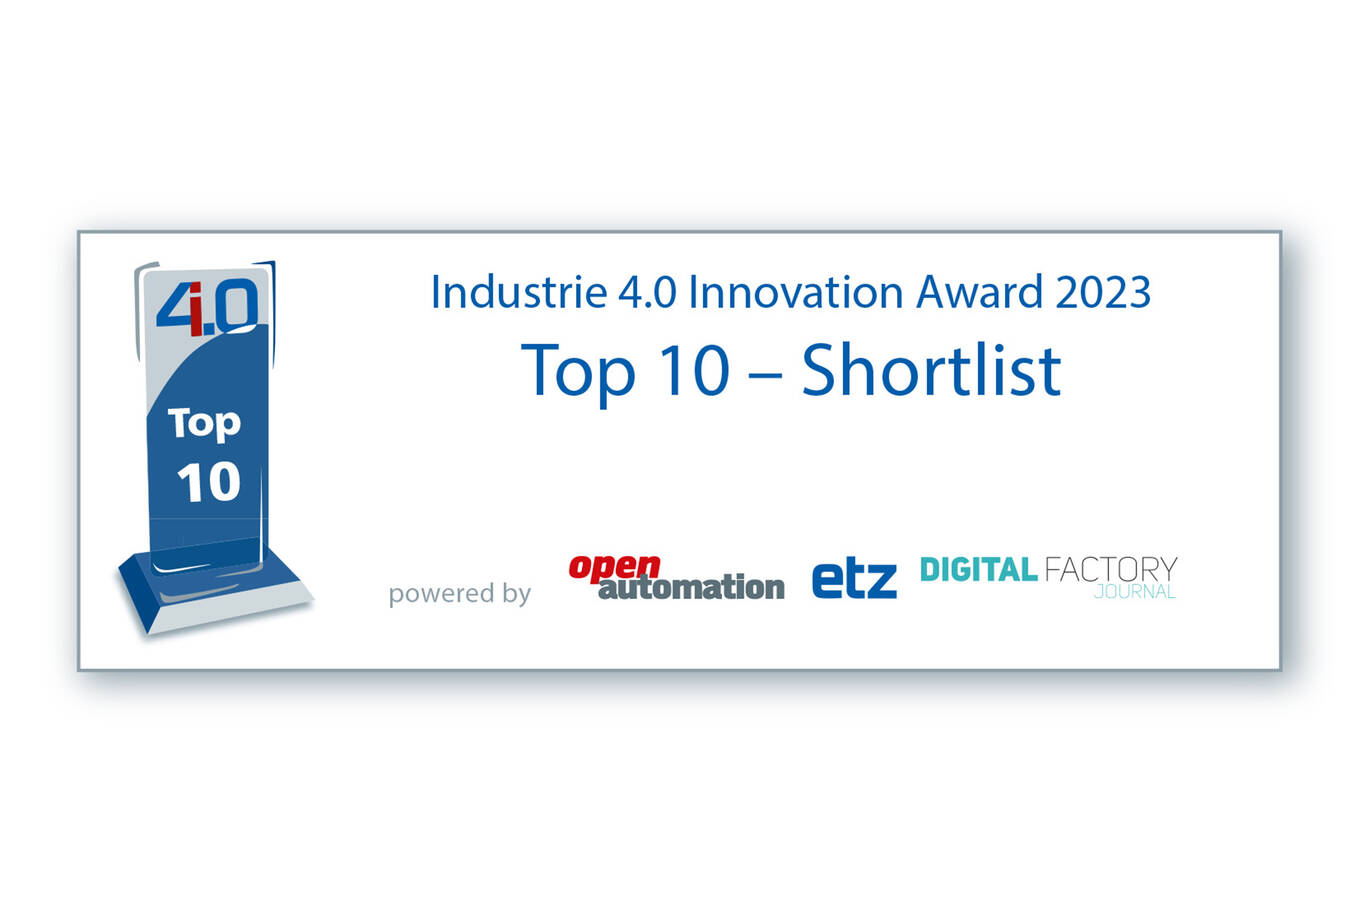 Opdenhoff  nominated for Industry 4.0 Innovation Award 2023 We are thrilled and honored to have been nominated for the Industry 4.0 Innovation Award 2023. Please support OPDENHOFF efficiency .now and our product OPDPRO.CARE by casting your vote.